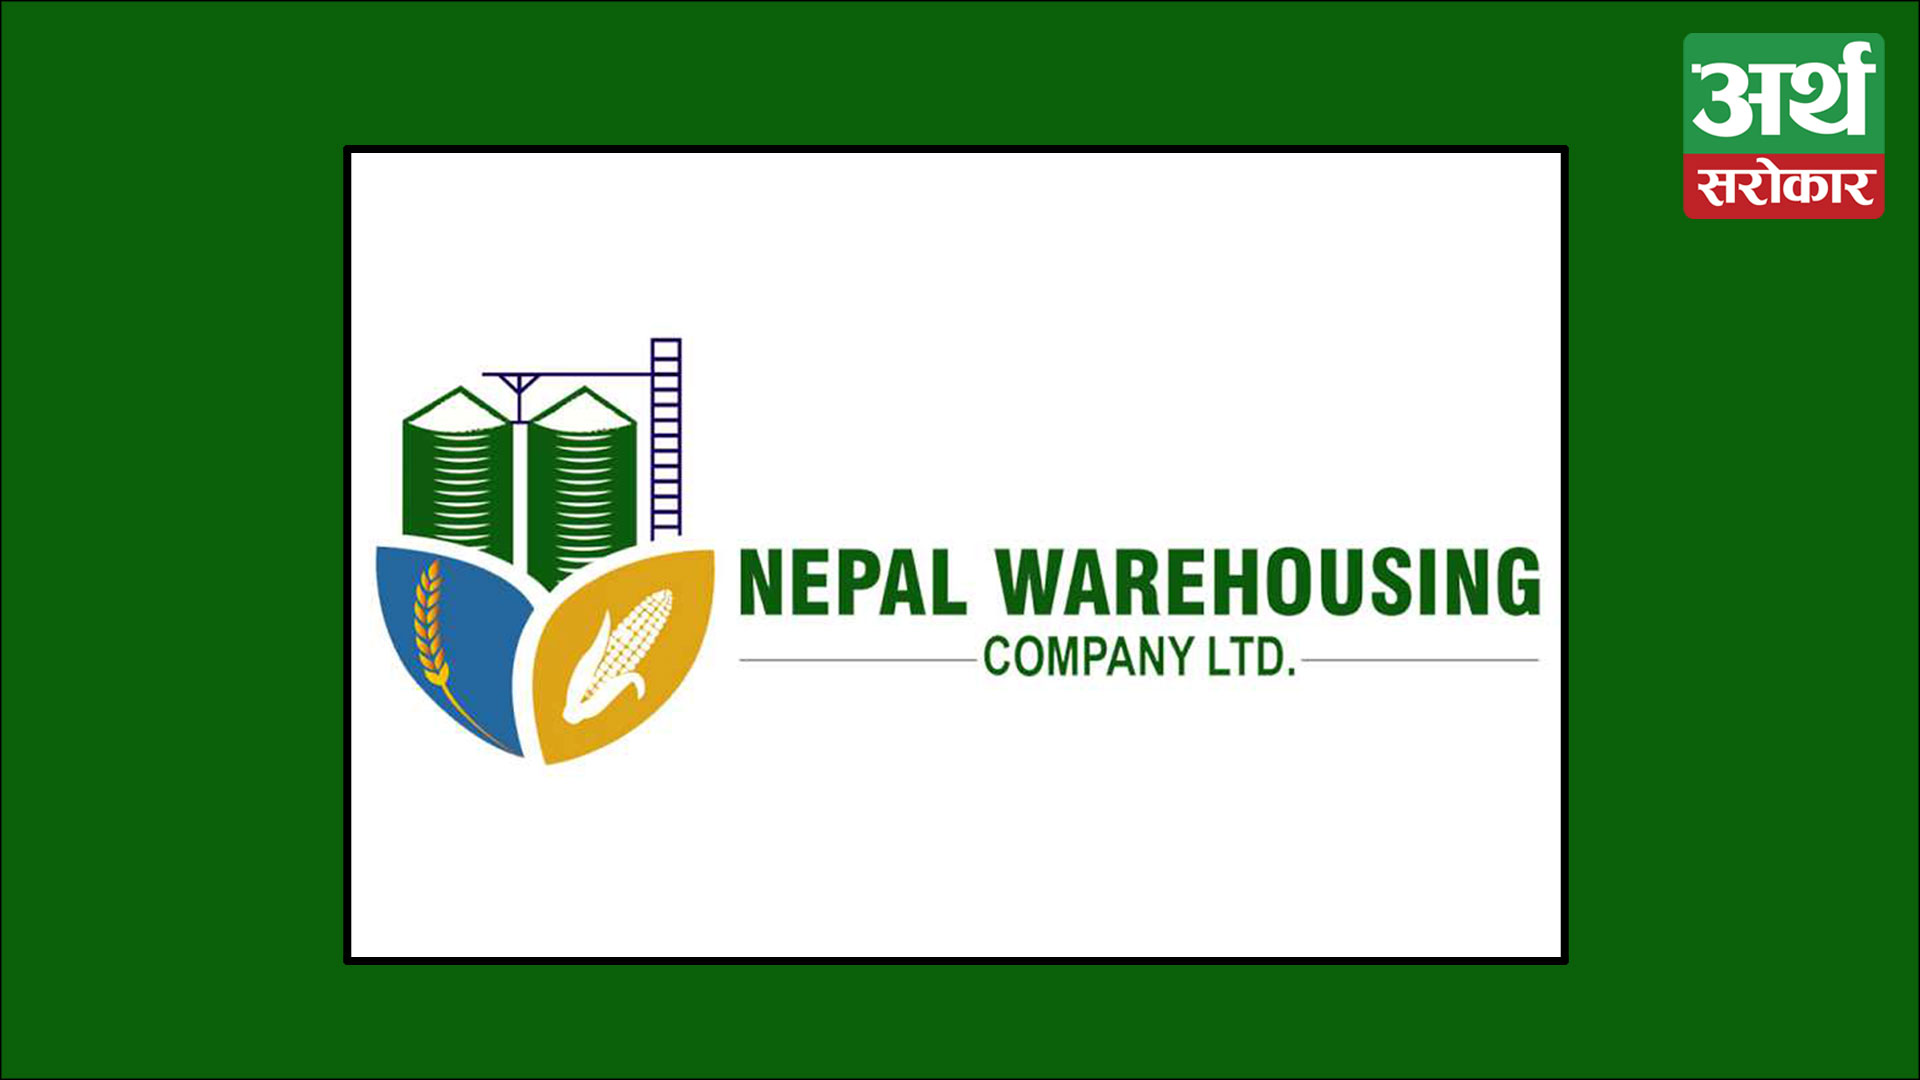 Nepal Warehousing Company Limited Granted IPO Permission